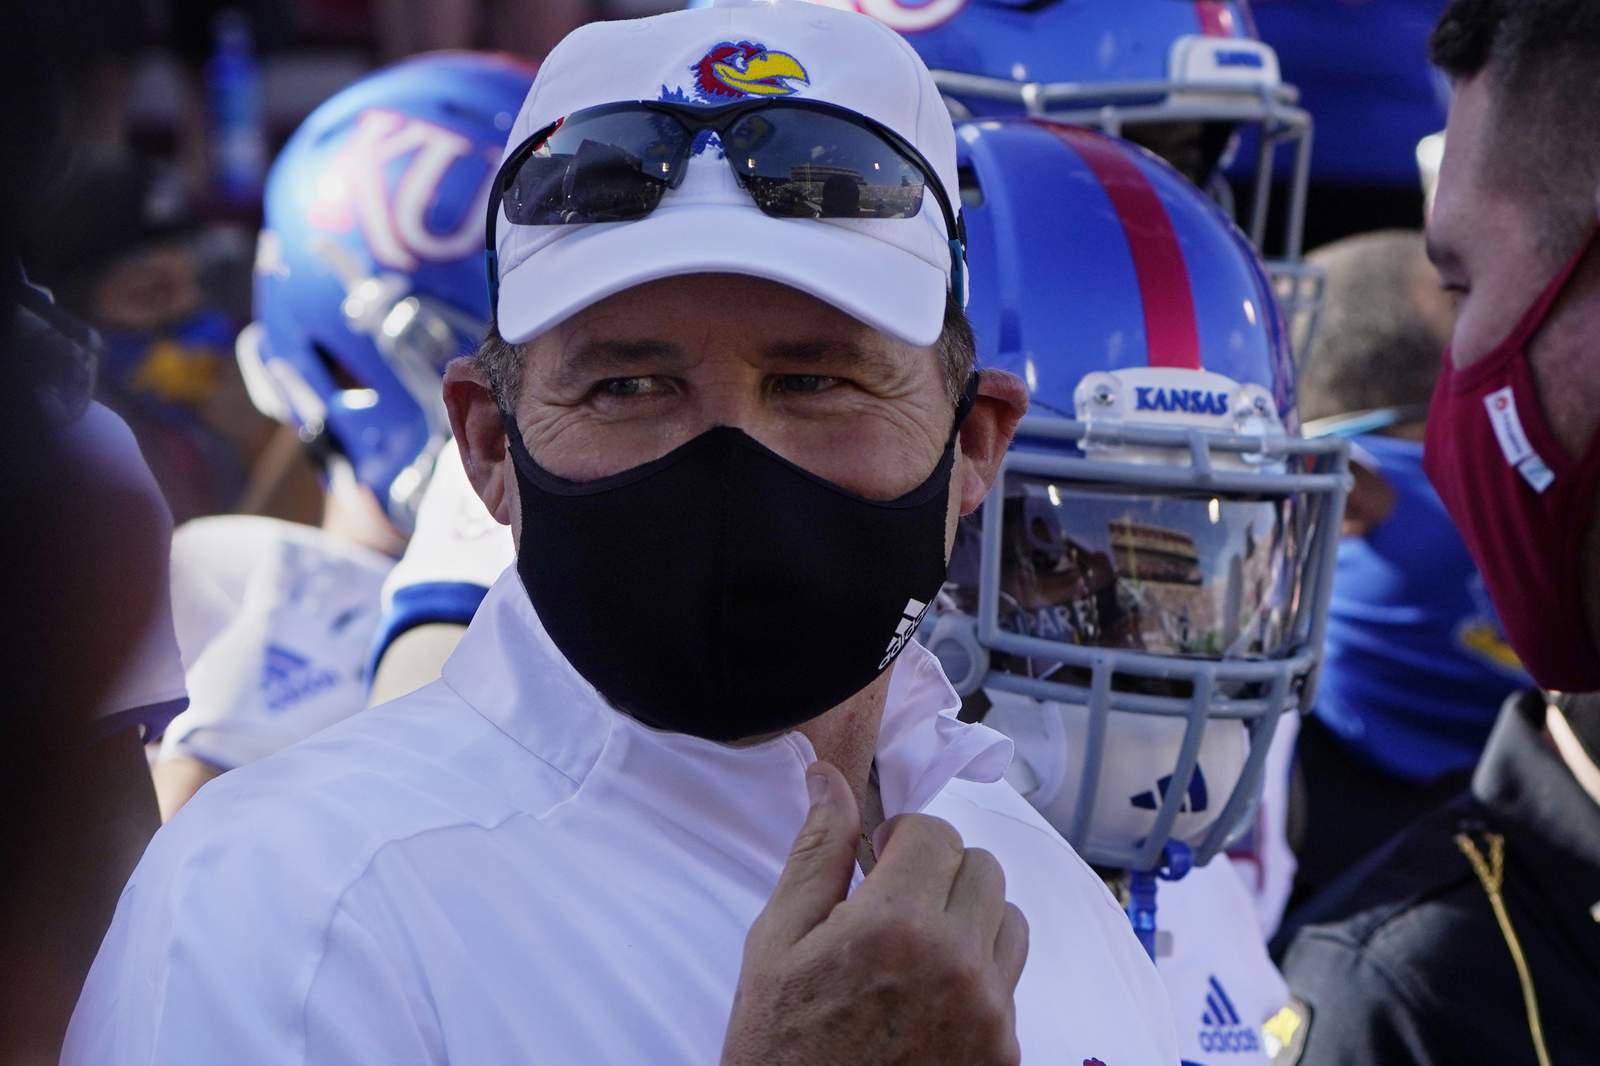 Kansas AD: Miles shared nothing of misconduct allegations